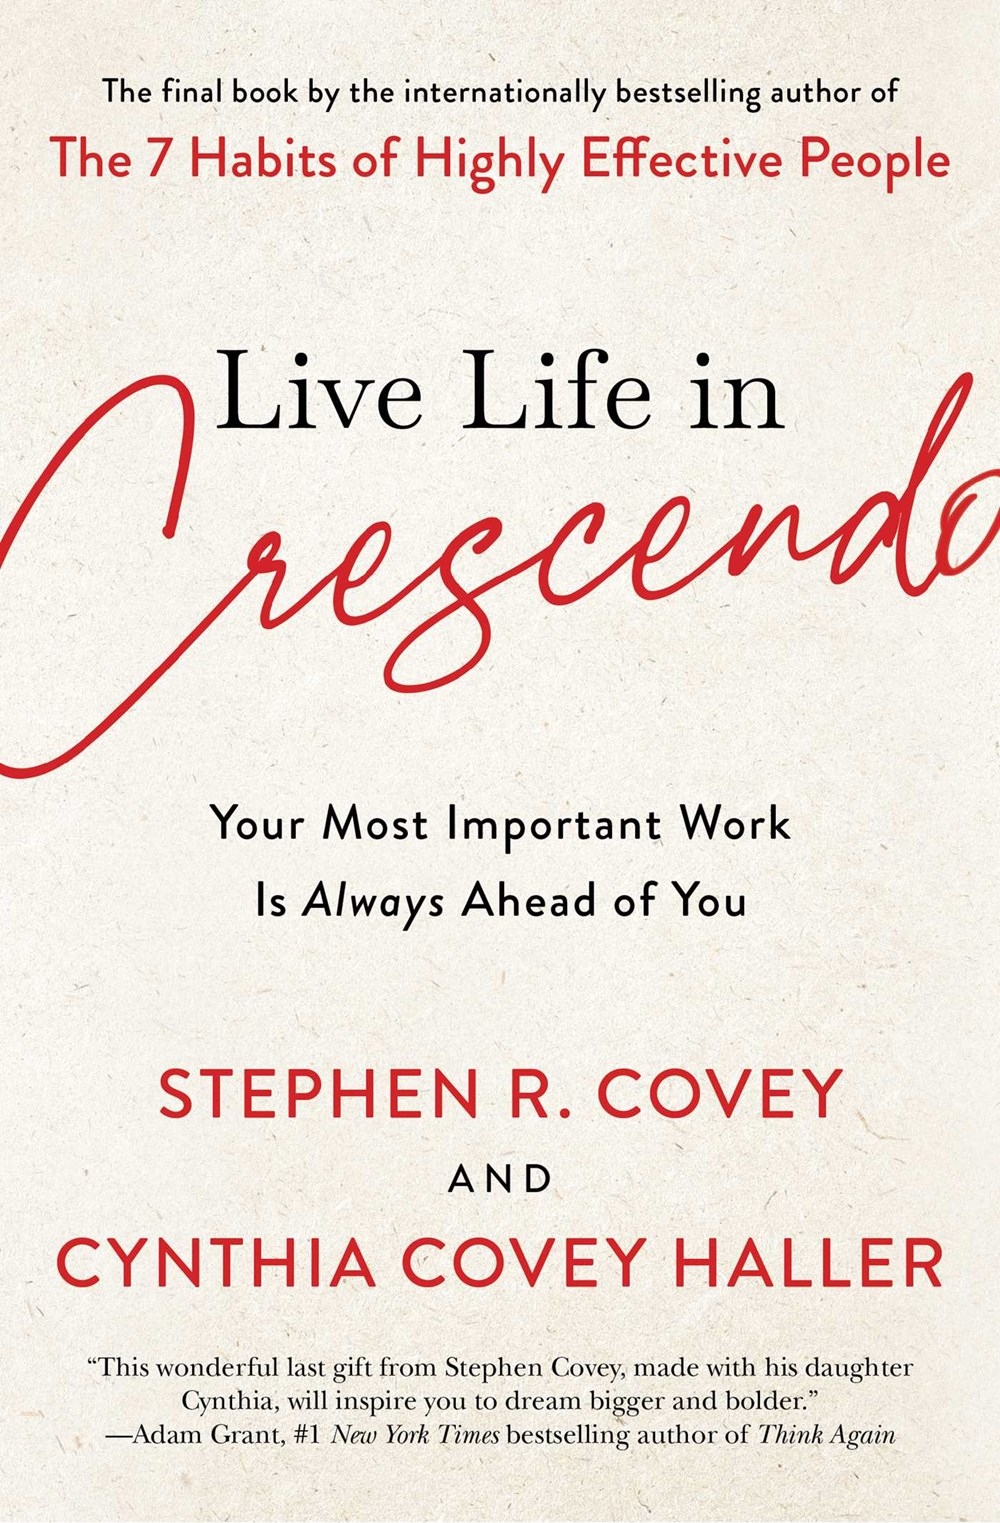 Live Life in Crescendo: Your Most Important Work Is Always Ahead of You